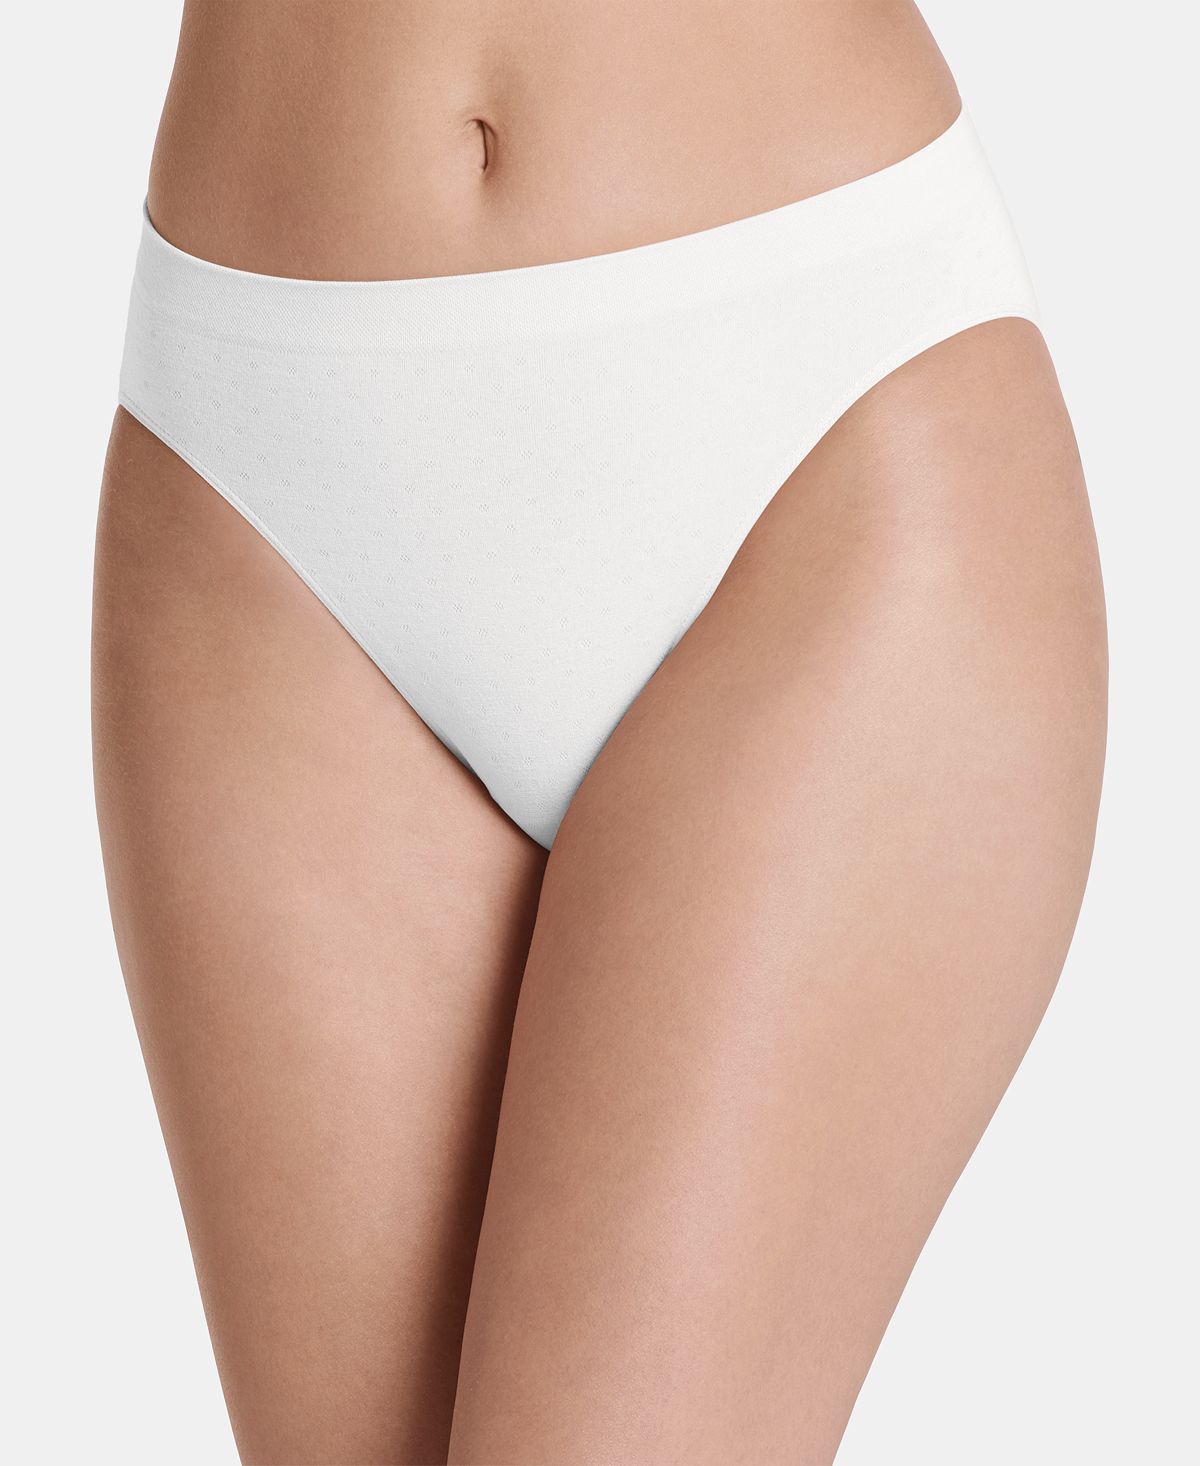 Jockey Women’s Seamfree Breathe French Cut Underwear 1884 Also Available In Extended Sizes White